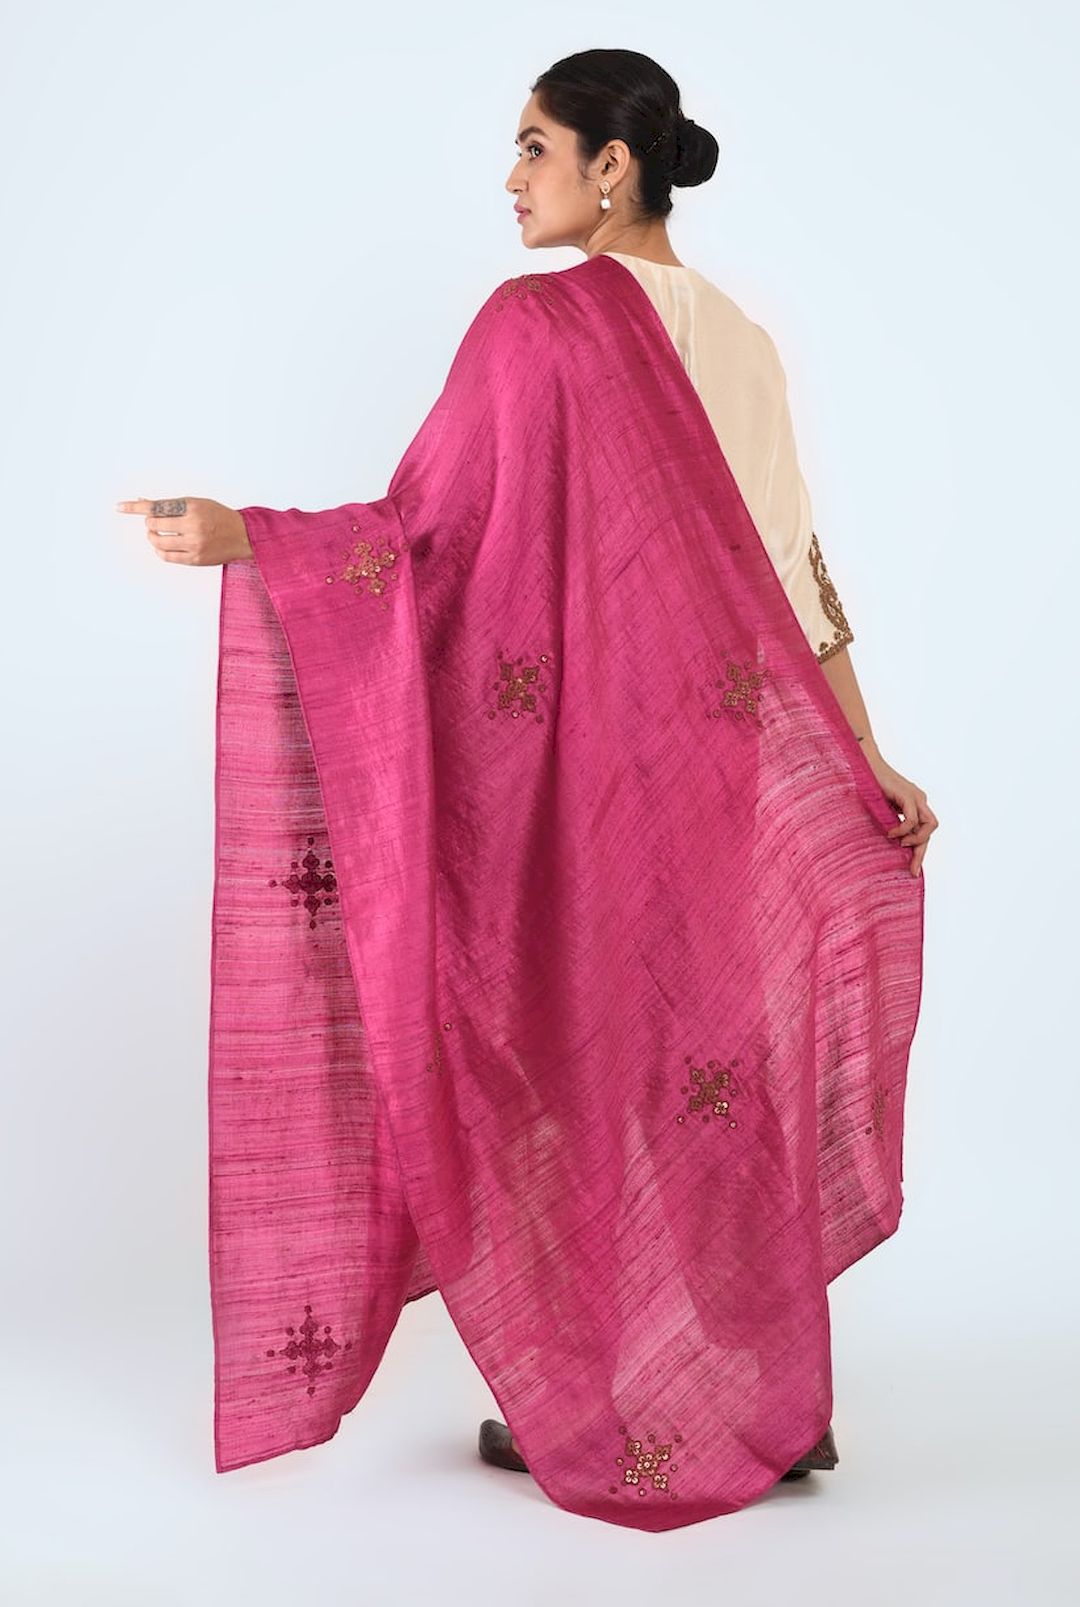 Pink Dupatta With Hand Embroidery Bootas - Prashant Chouhan